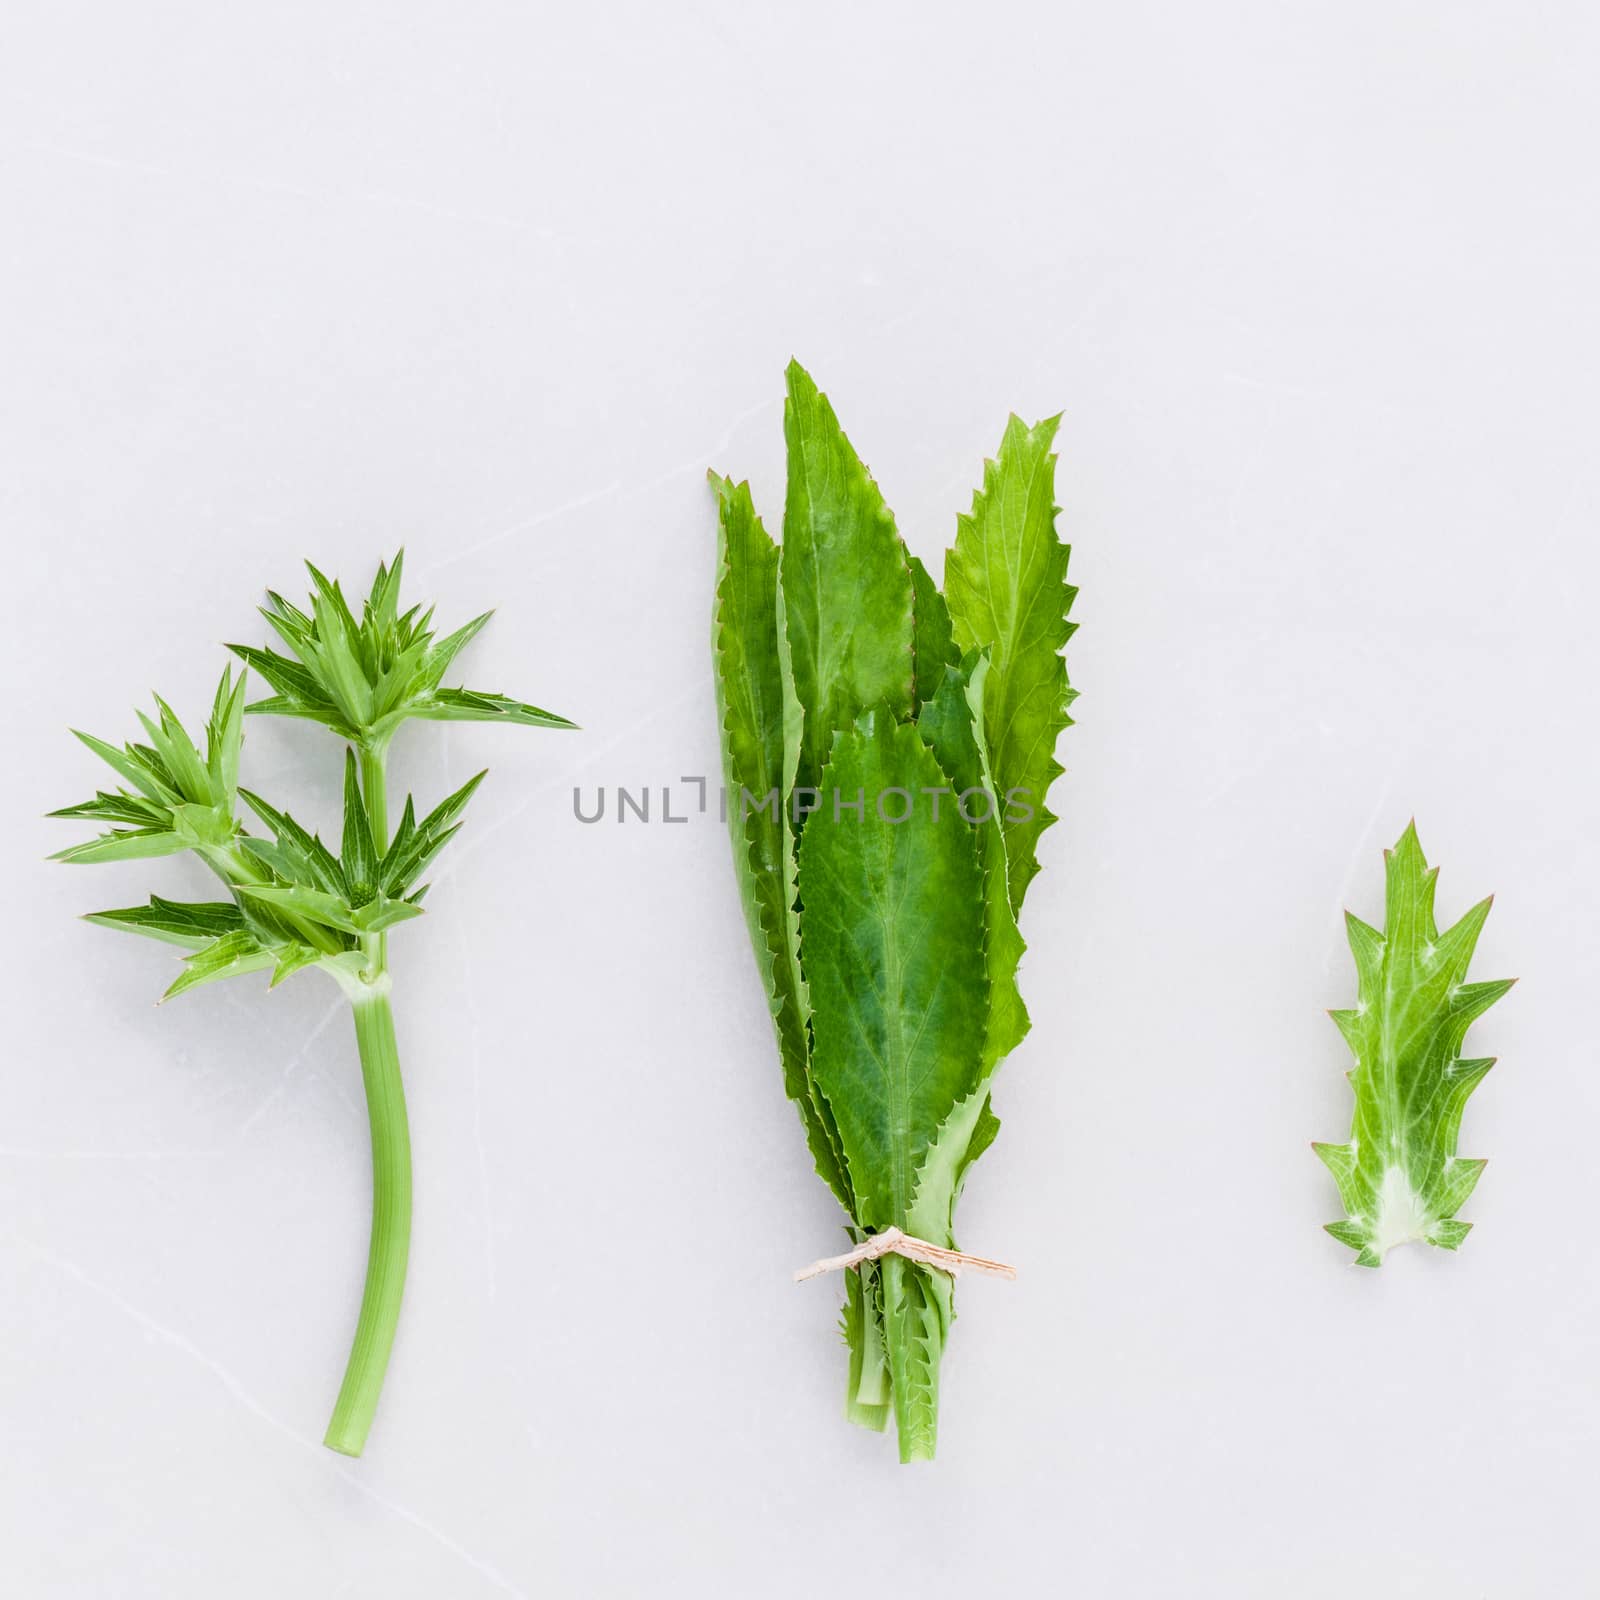 Culantro, Long coriander, Sawtooth coriander the herbs for seasoning of Thailand, India, Vietnam and other parts of Asia.